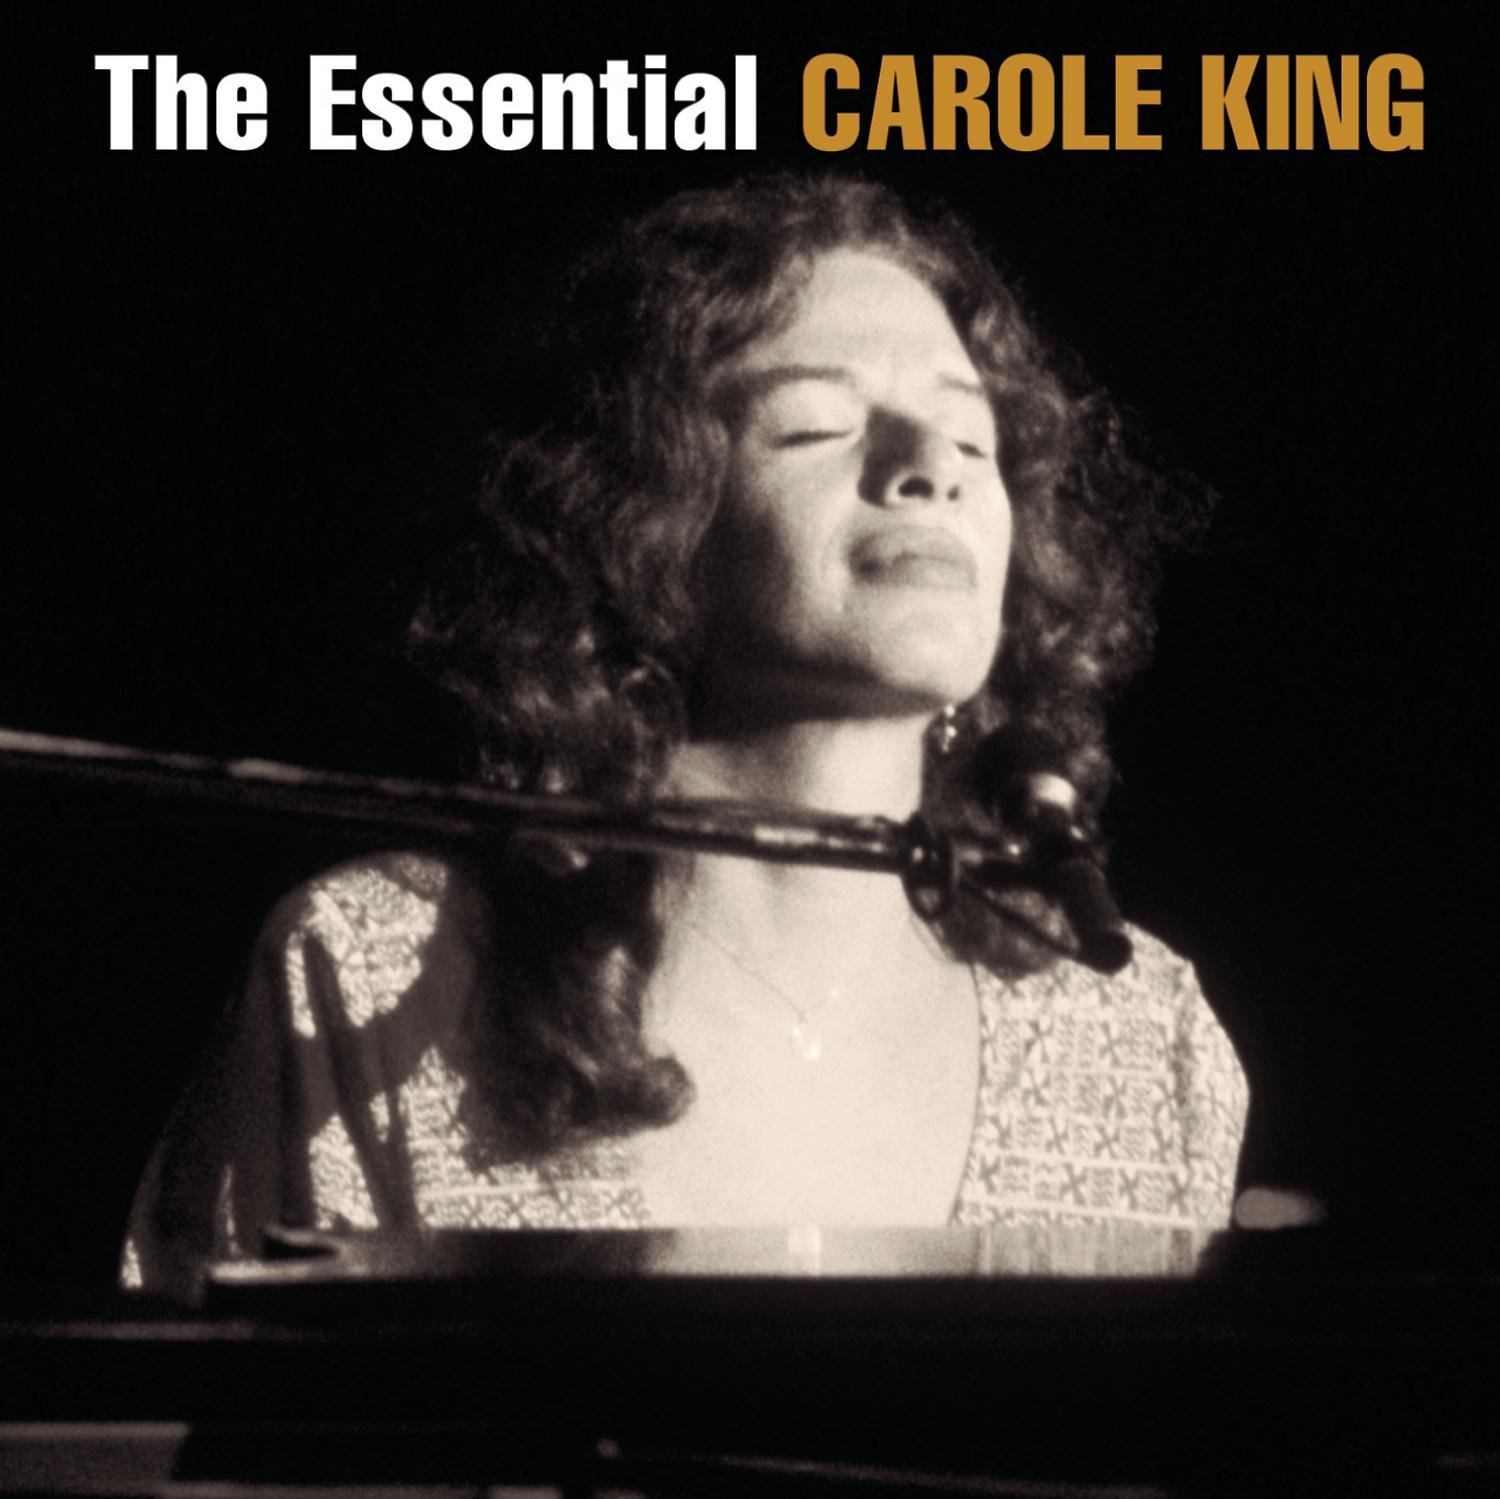 Carole King - The Essential